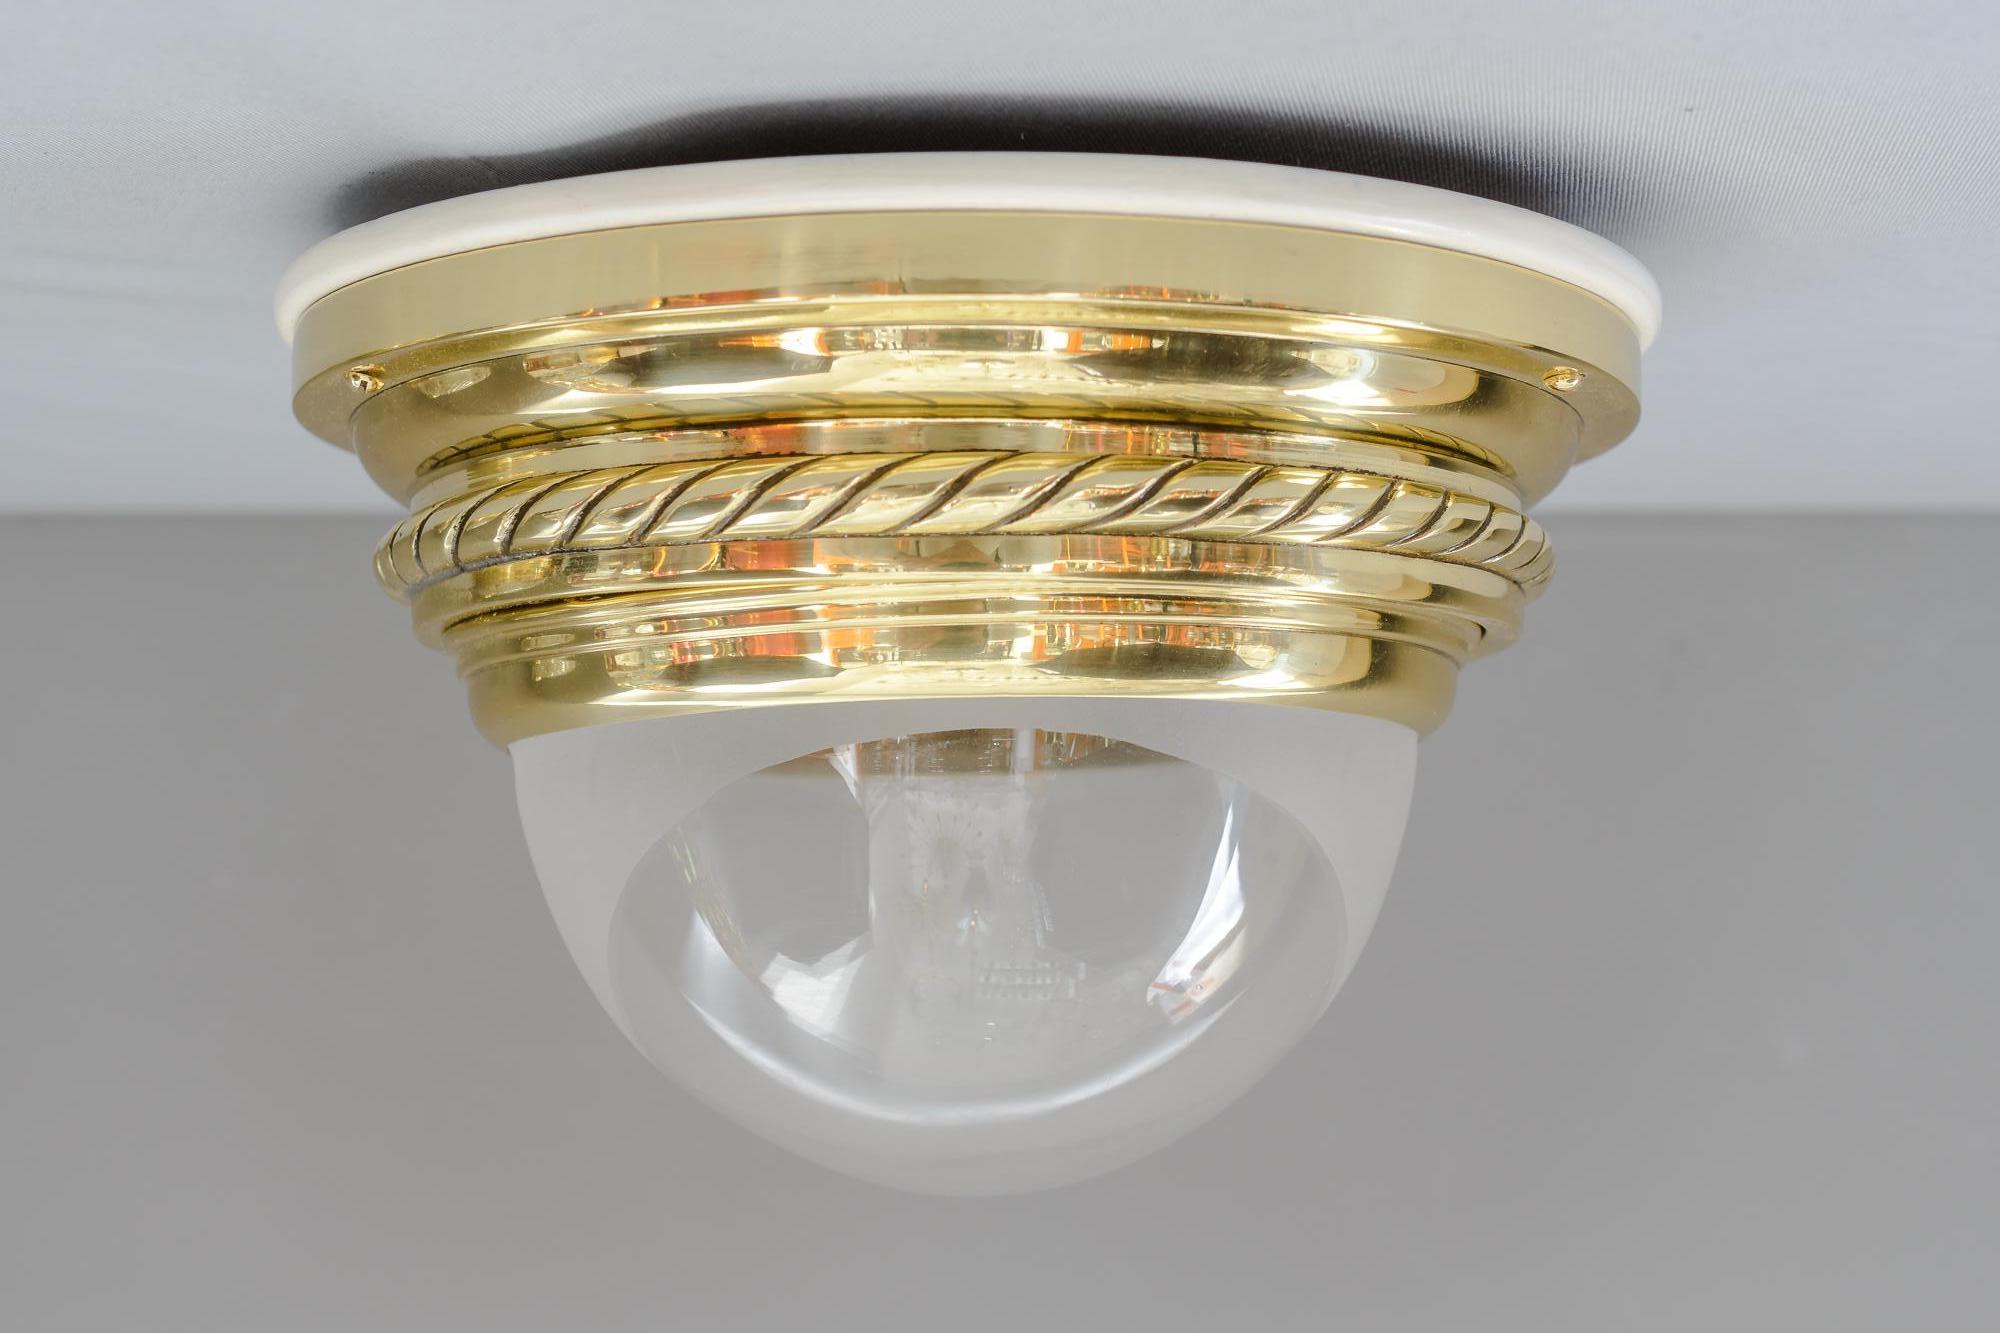 Art Deco ceiling lamp with original glass shade, Vienna, circa 1920s
Original matte partly clear glass shade
Brass parts of the lamp polished and stove enameled
Wood plate on the top is painted white.